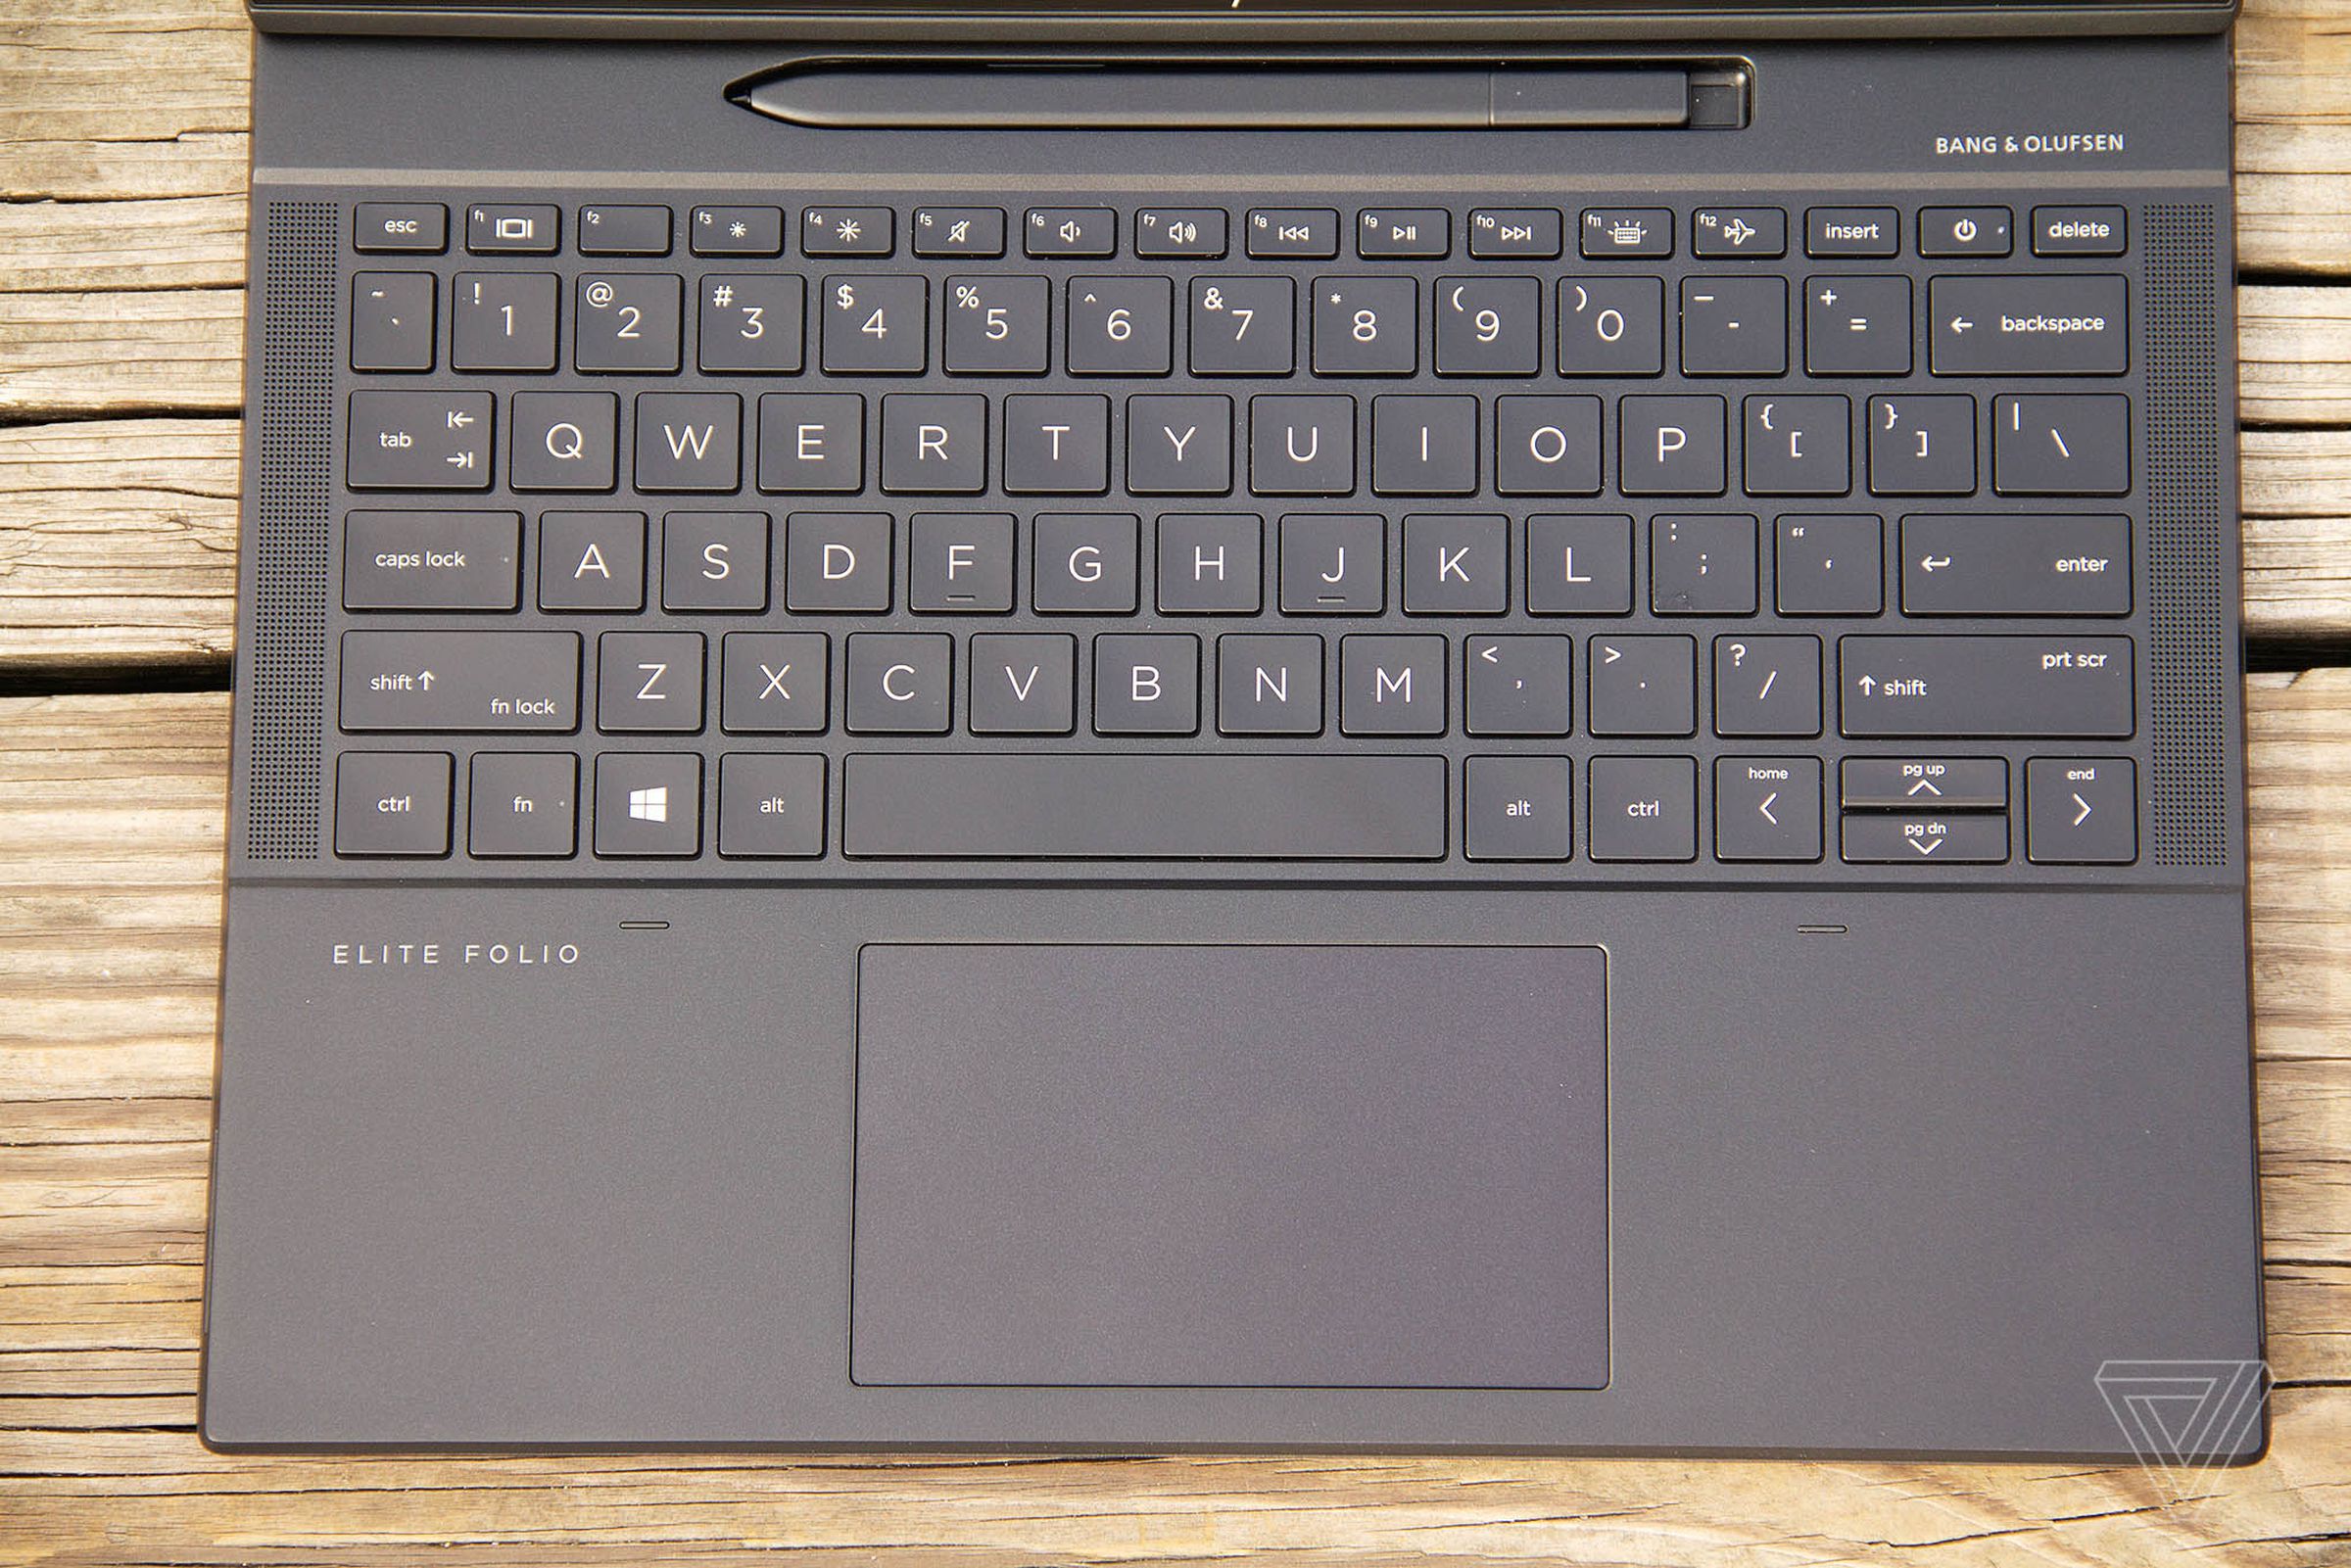 The HP Elite Folio keyboard seen from above.